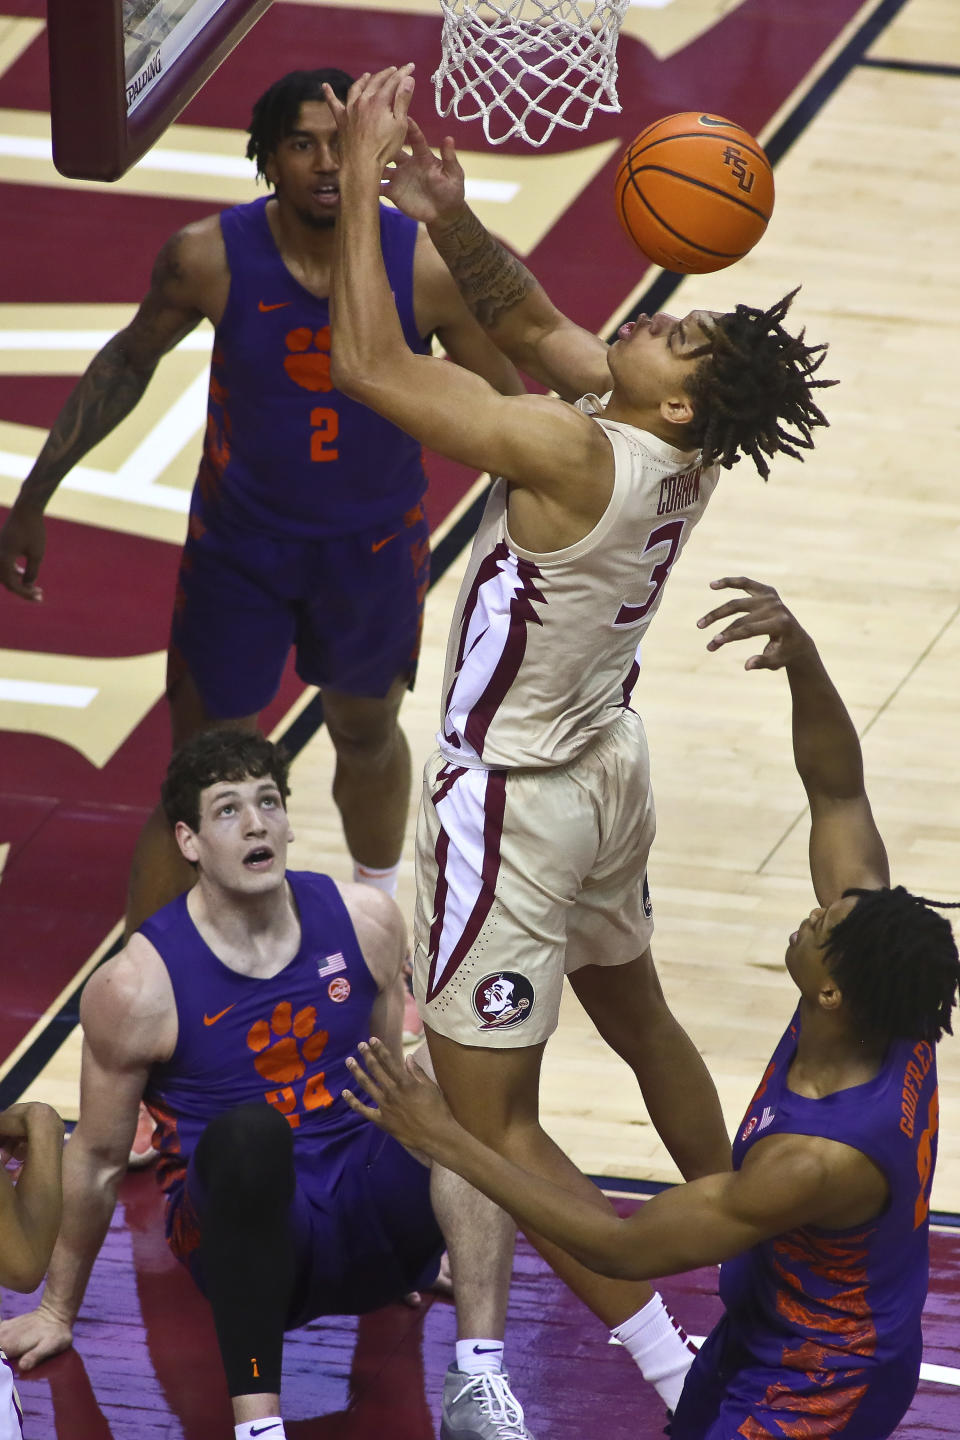 Florida State forward Cameron Corhen (3) loses the ball as he is surrounded by Clemson defenders in the first half of an NCAA college basketball game in Tallahassee, Fla., Saturday, Jan. 28, 2023. (AP Photo/Phil Sears)